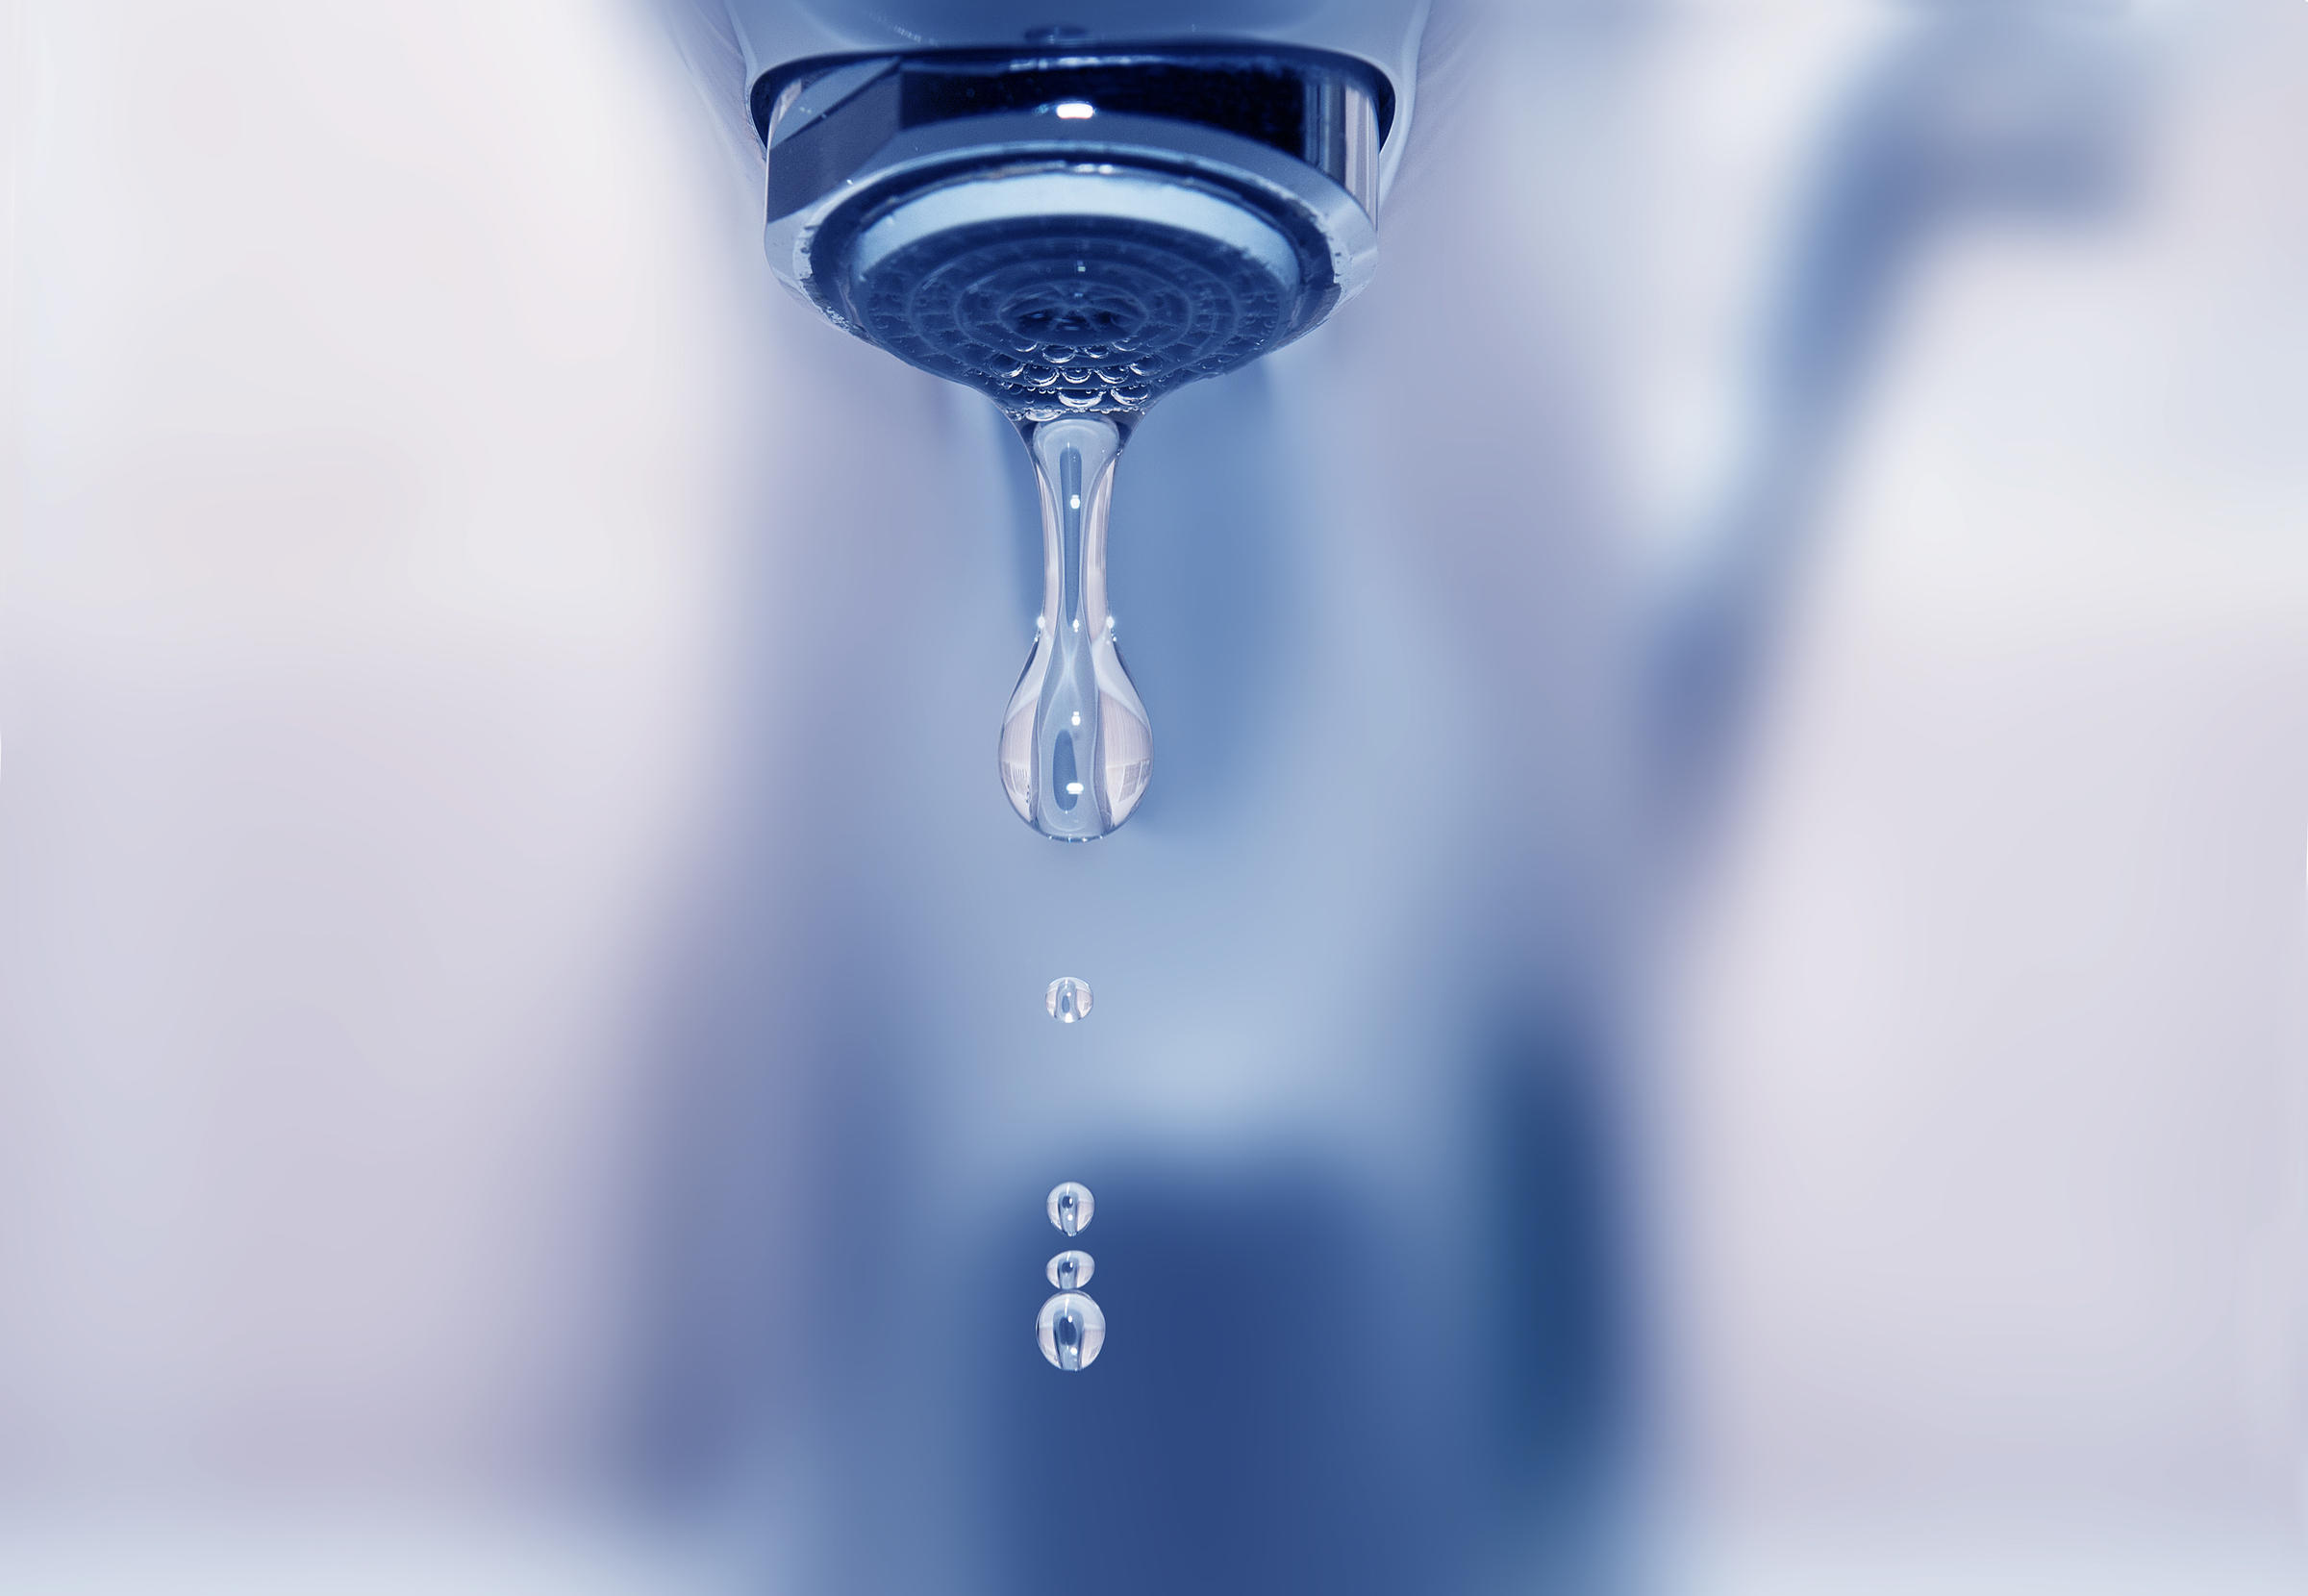 10 ways to conserve water